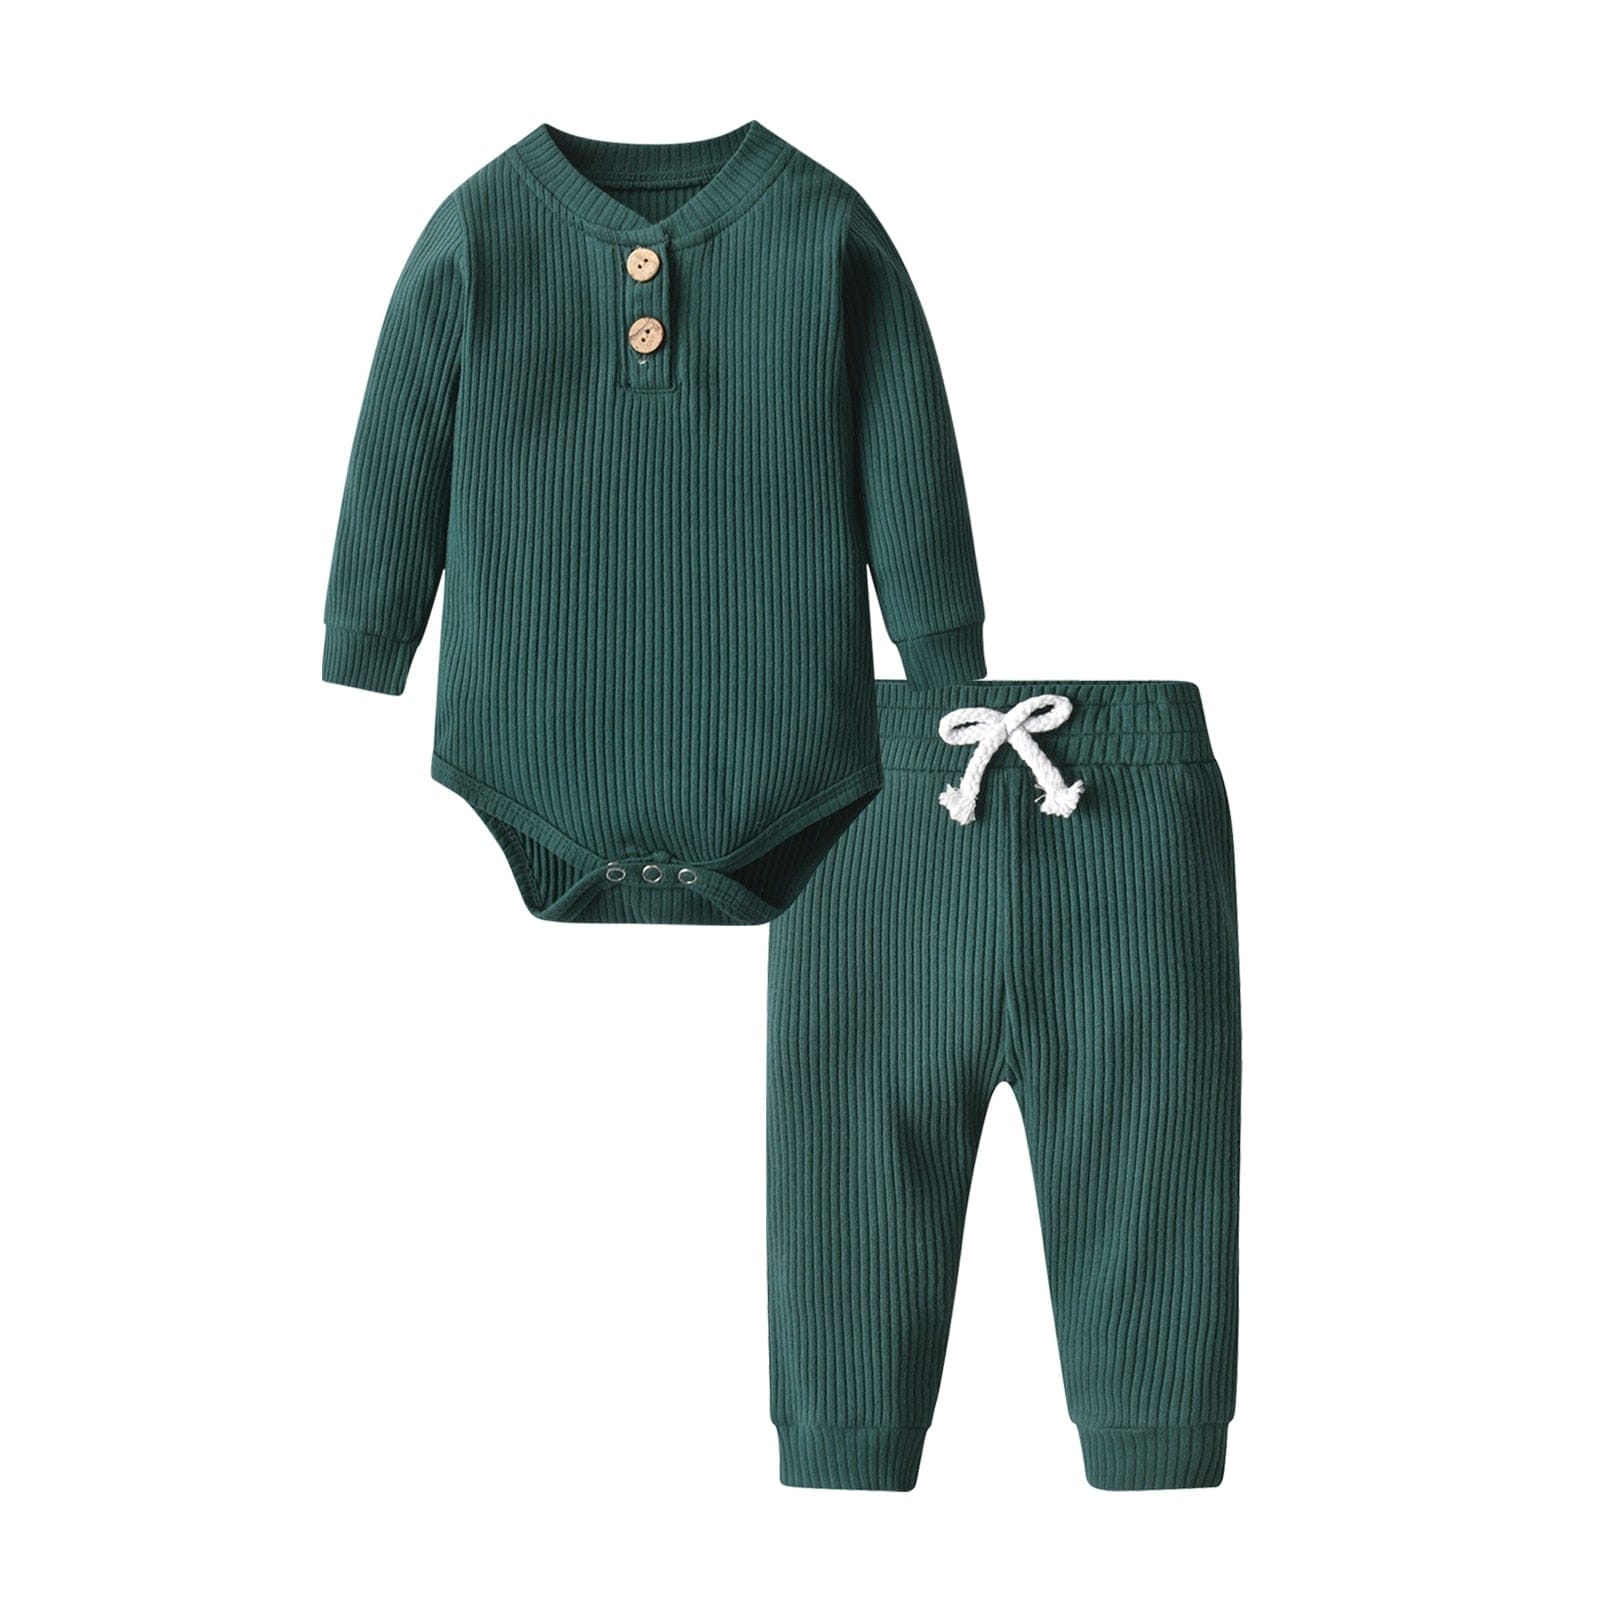 Benny's Kawaii Pajama Onesie - Wakaii  Outfit inspirationen, Outfit,  Outfit ideen